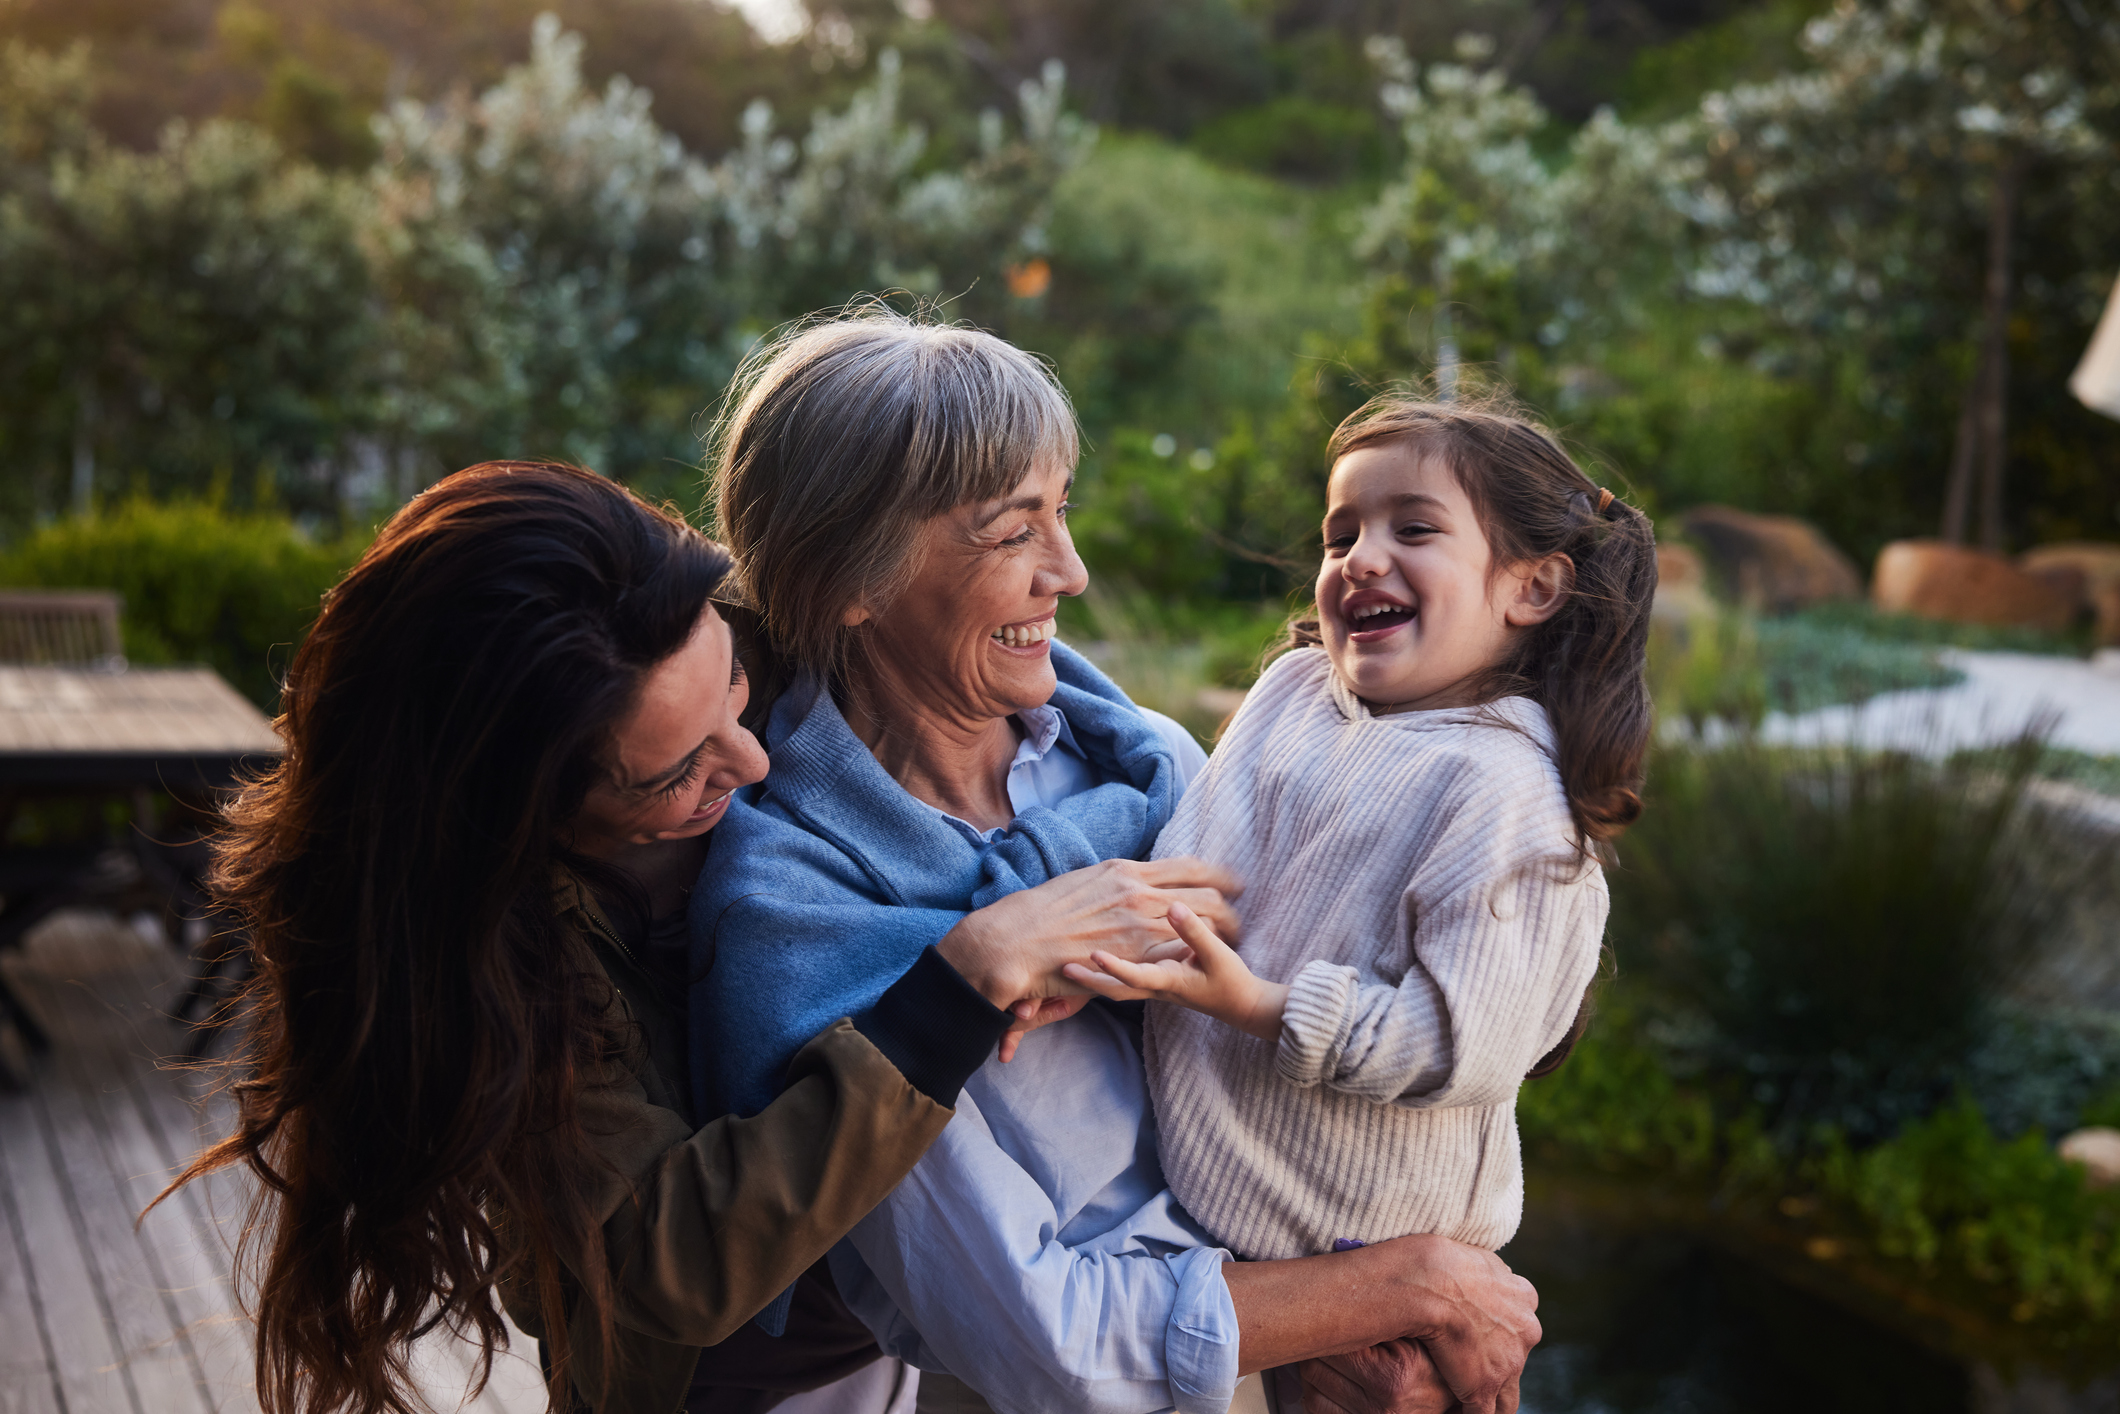 Caring for Aging Parents